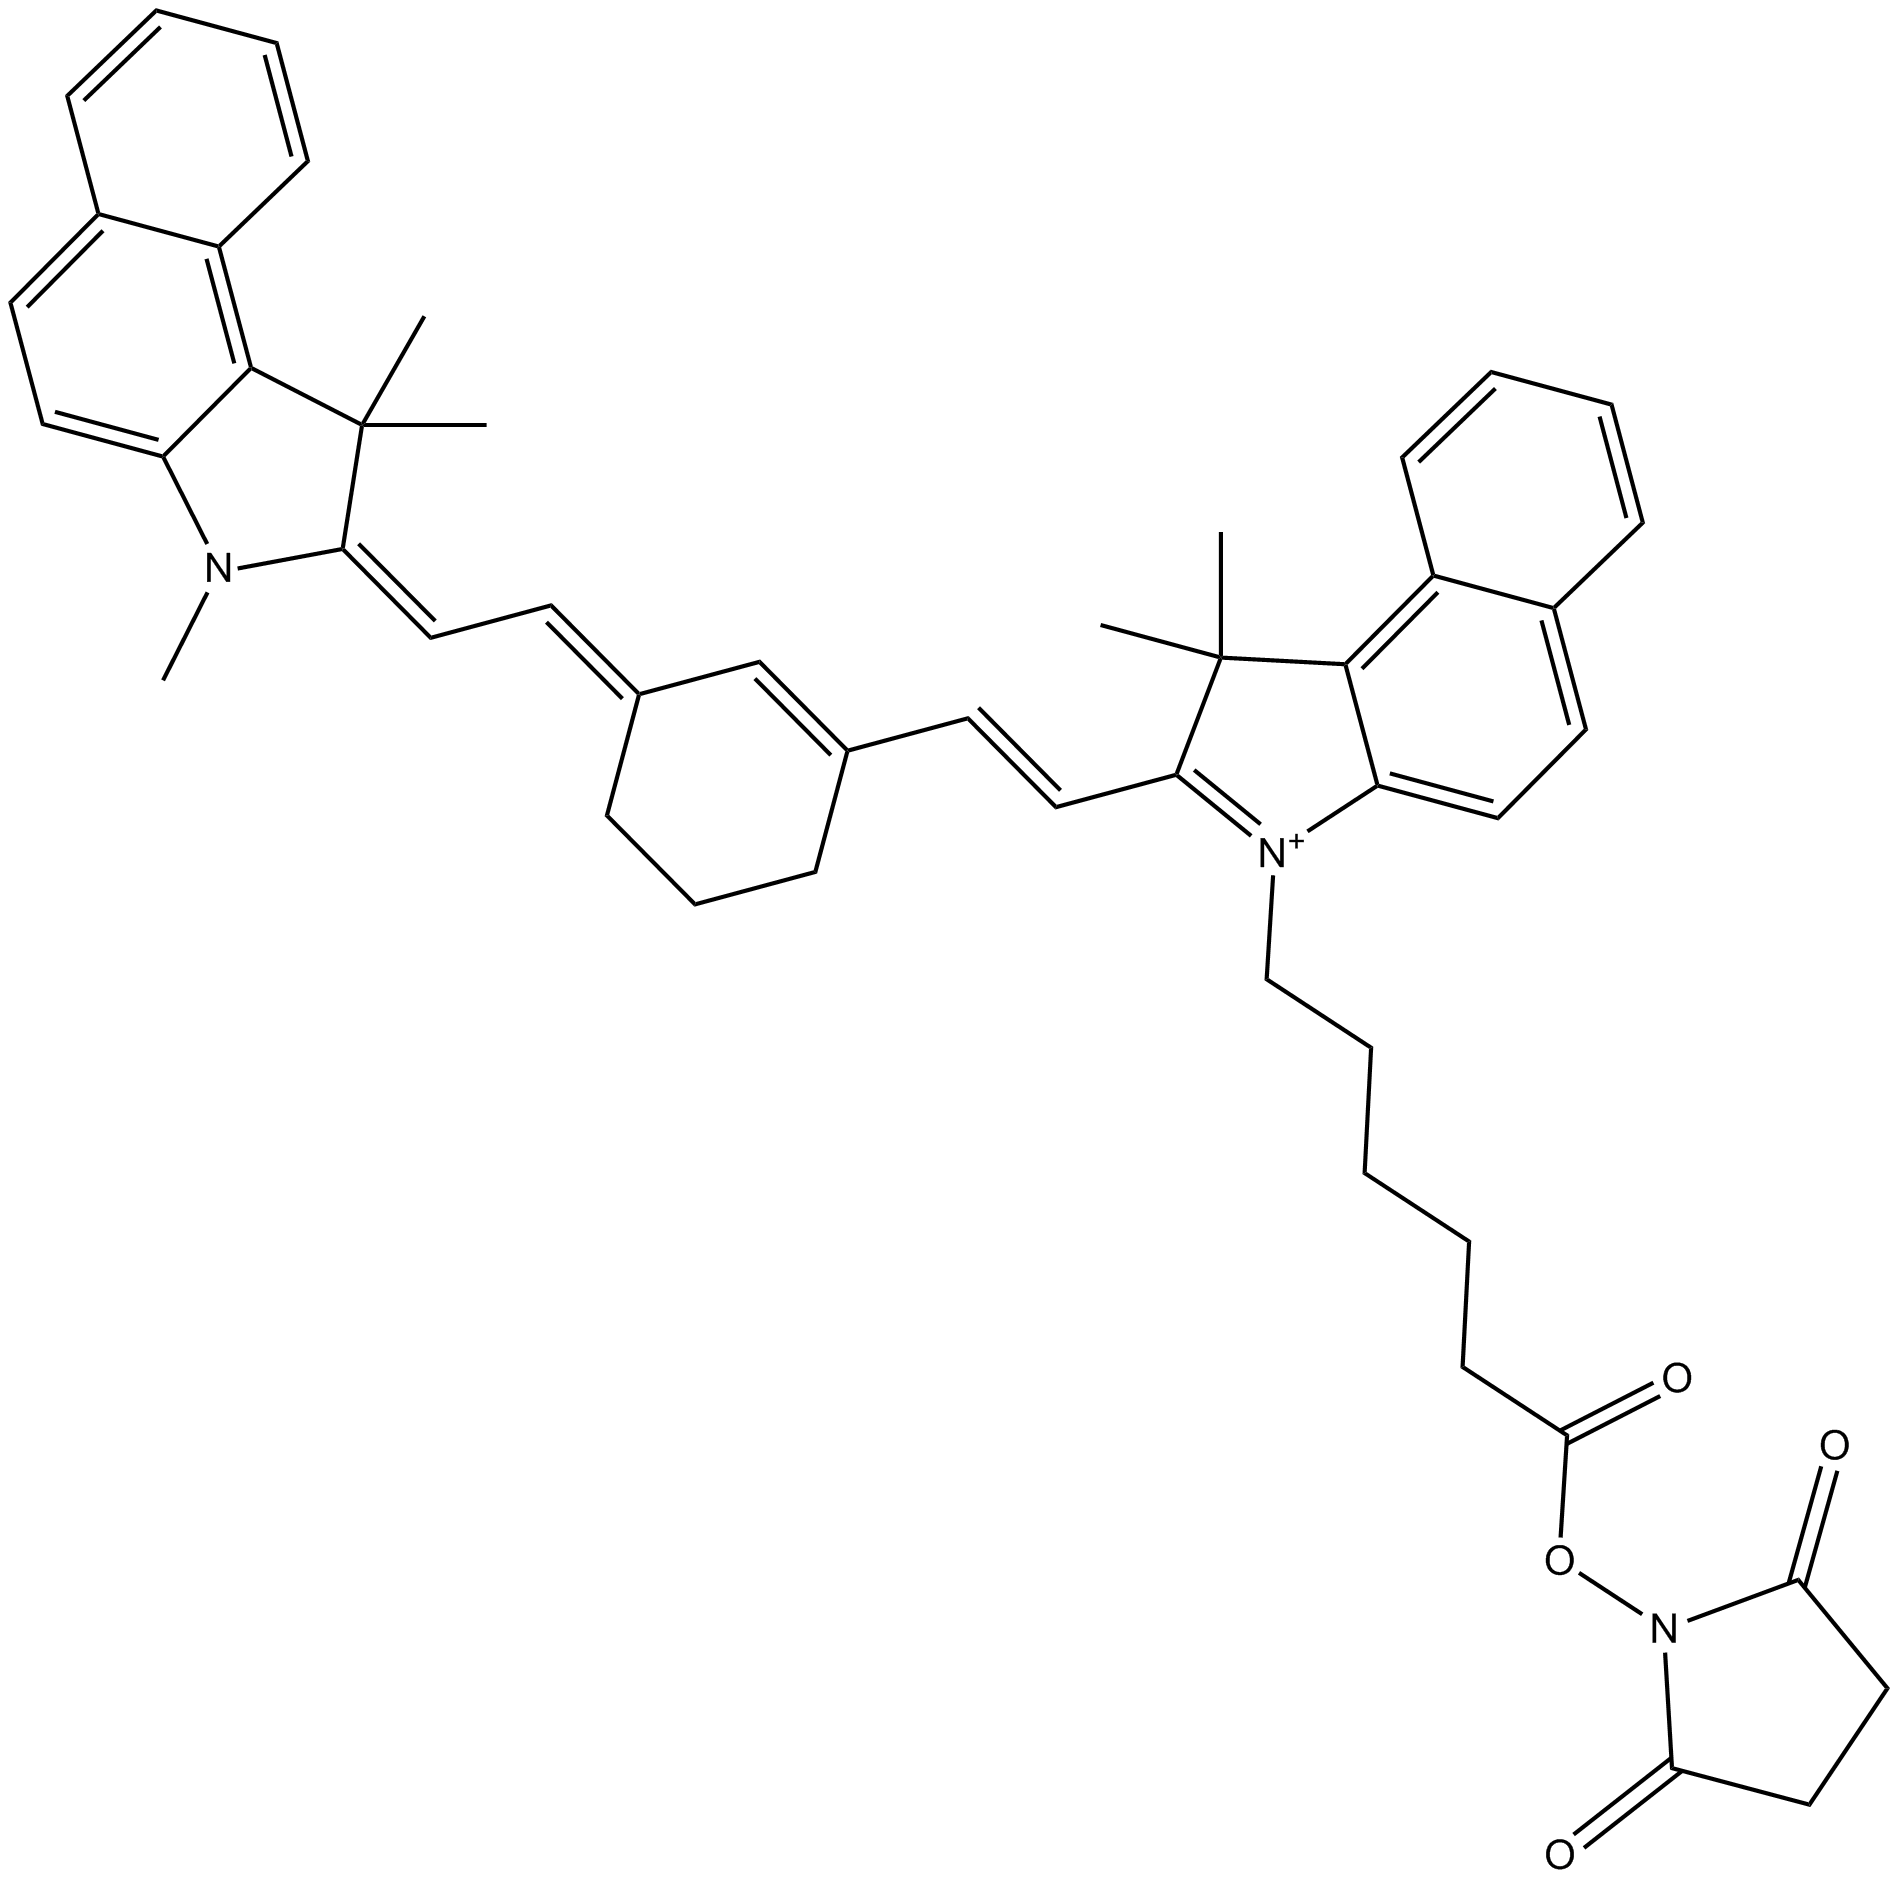 Cy7.5 NHS ester (non-sulfonated) Chemical Structure